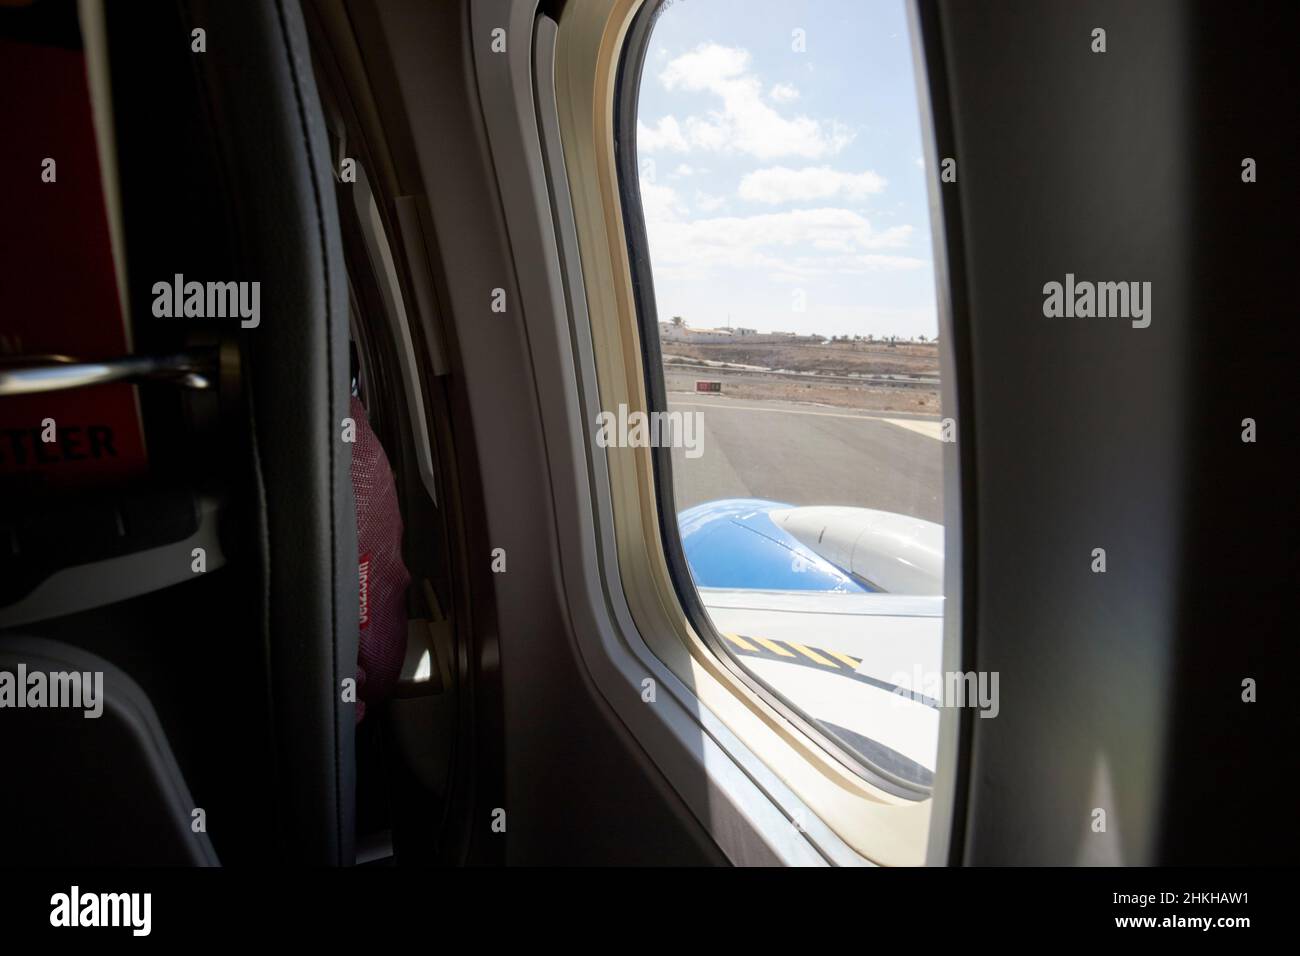 on board aircraft looking out window at arrecife airport Lanzarote Canary Islands Spain Stock Photo